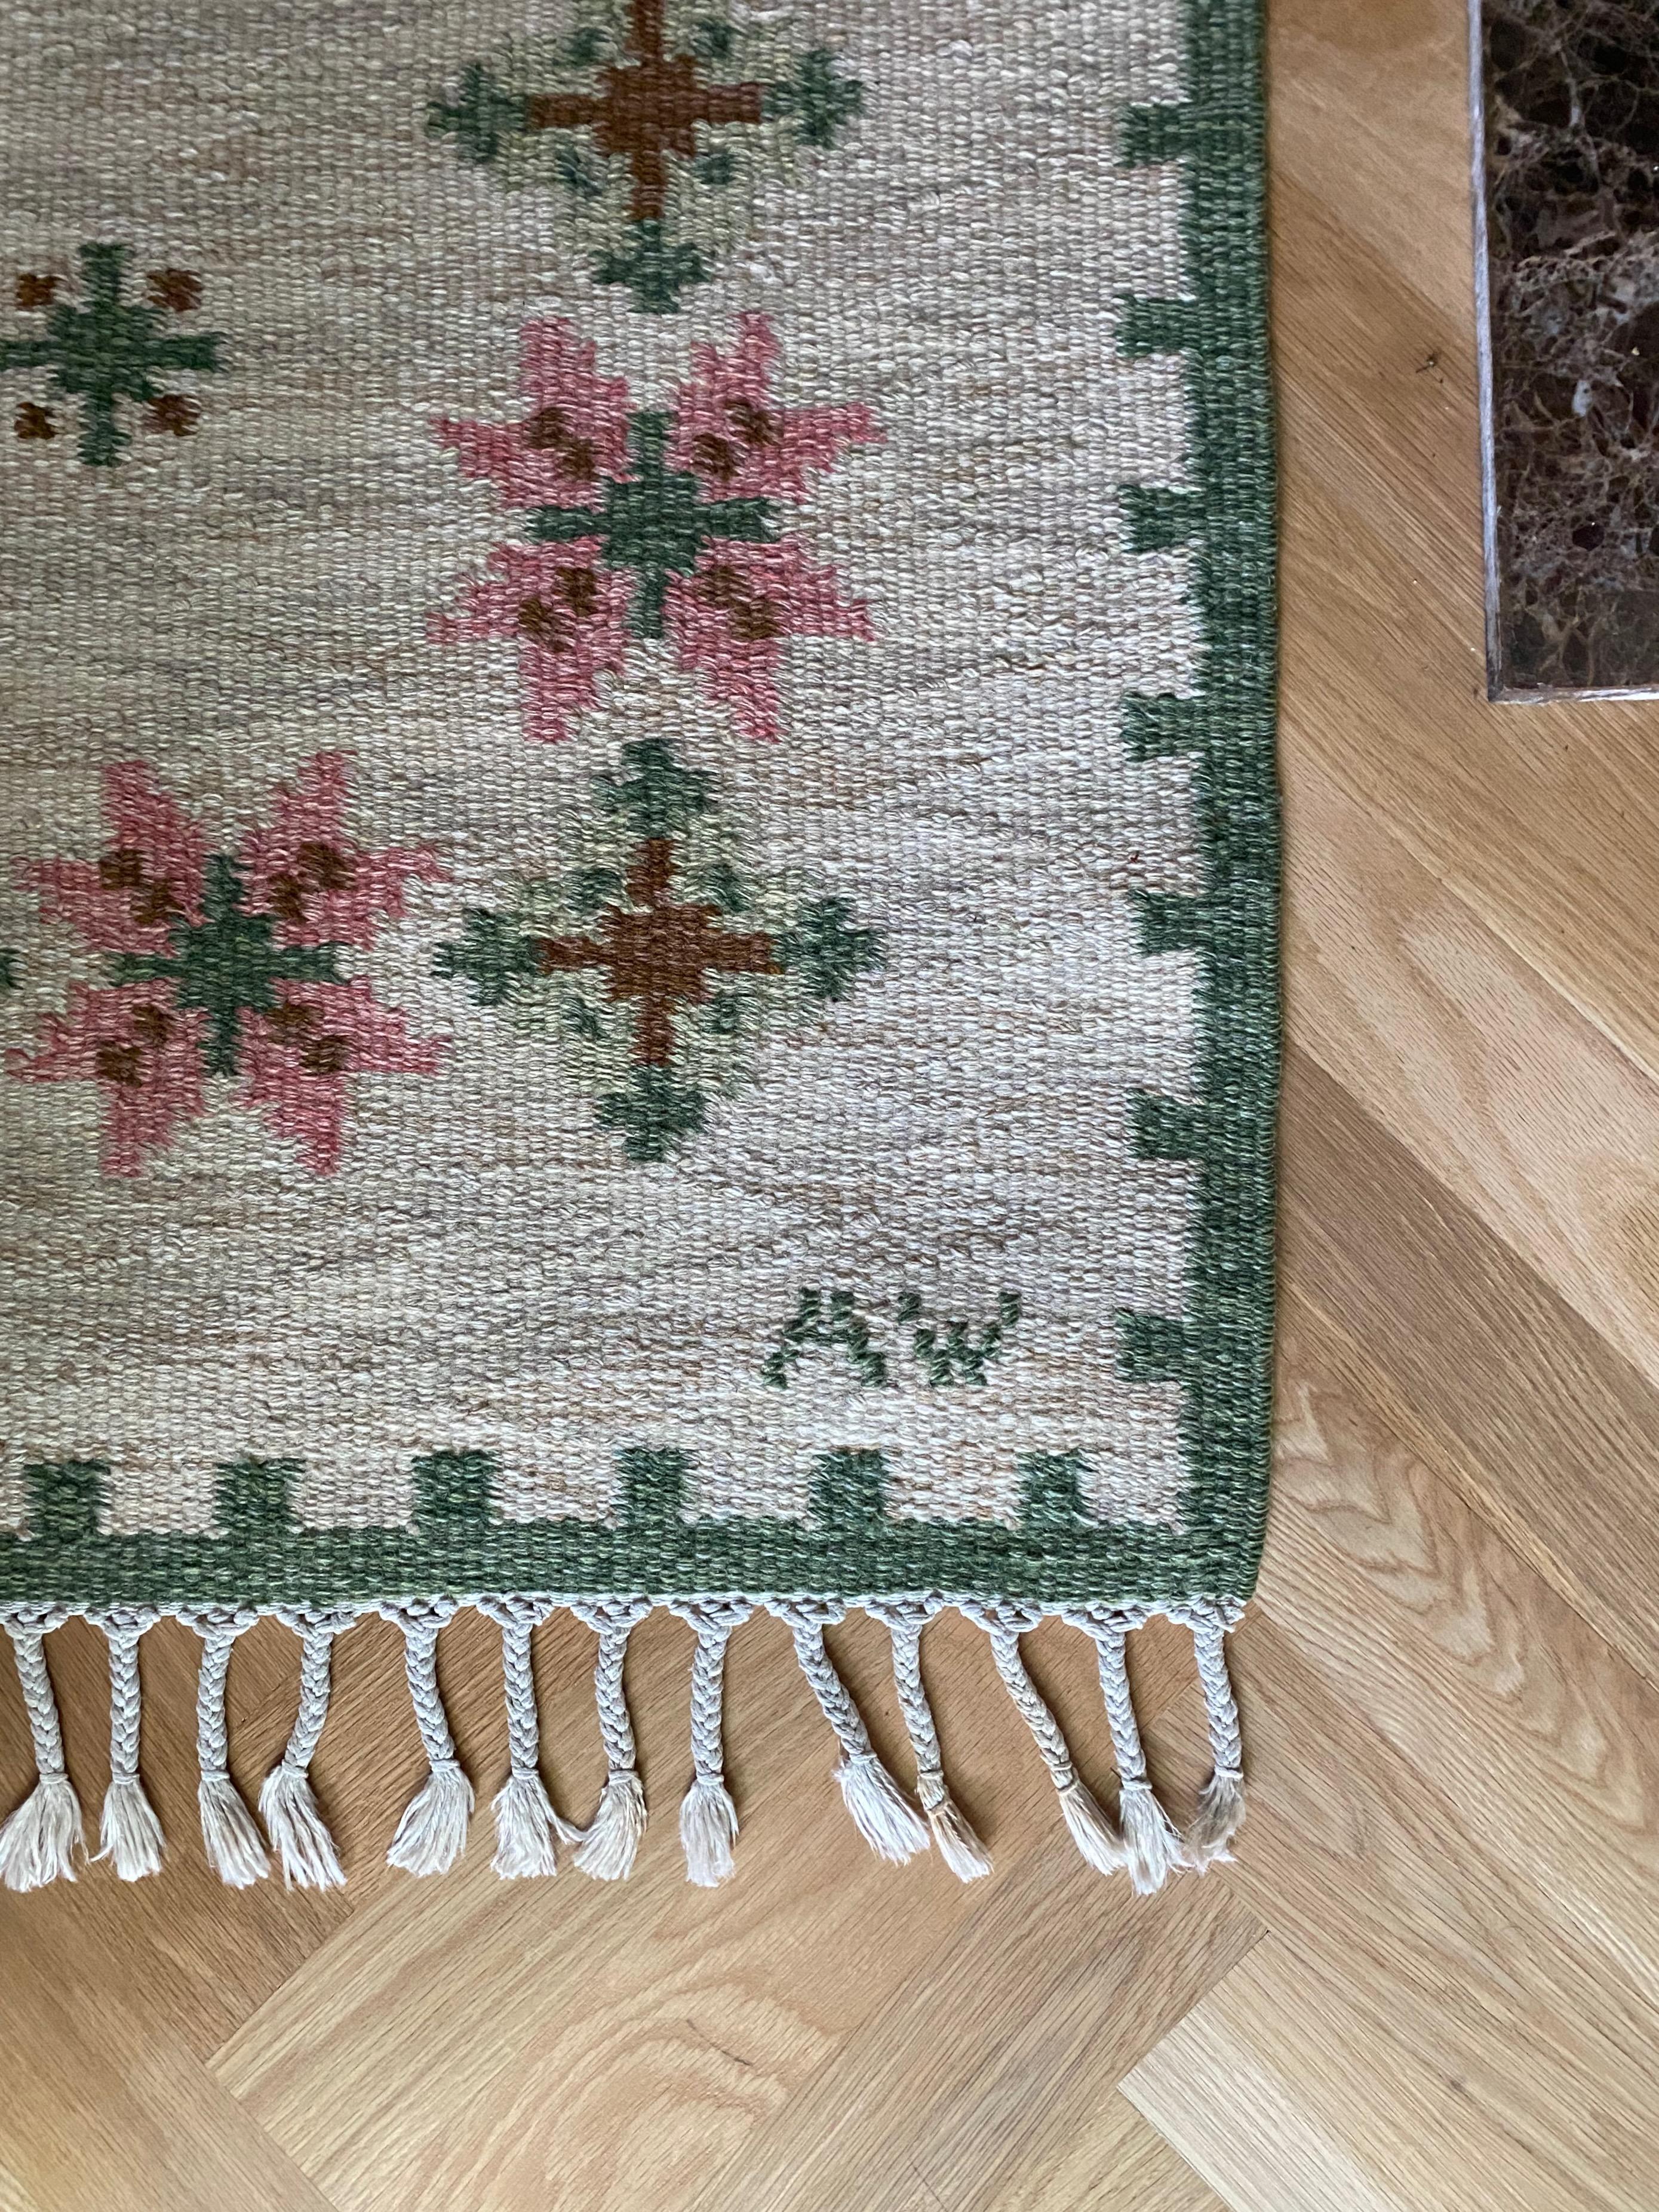 Vintage Swedish Kilim by Alice Wallebäck in white, green and pink colors. Geometric flower motif with a green border along the edges. Designer initial AW in right corner. Very good vintage condition.

Country: Sweden

Maker: Alice